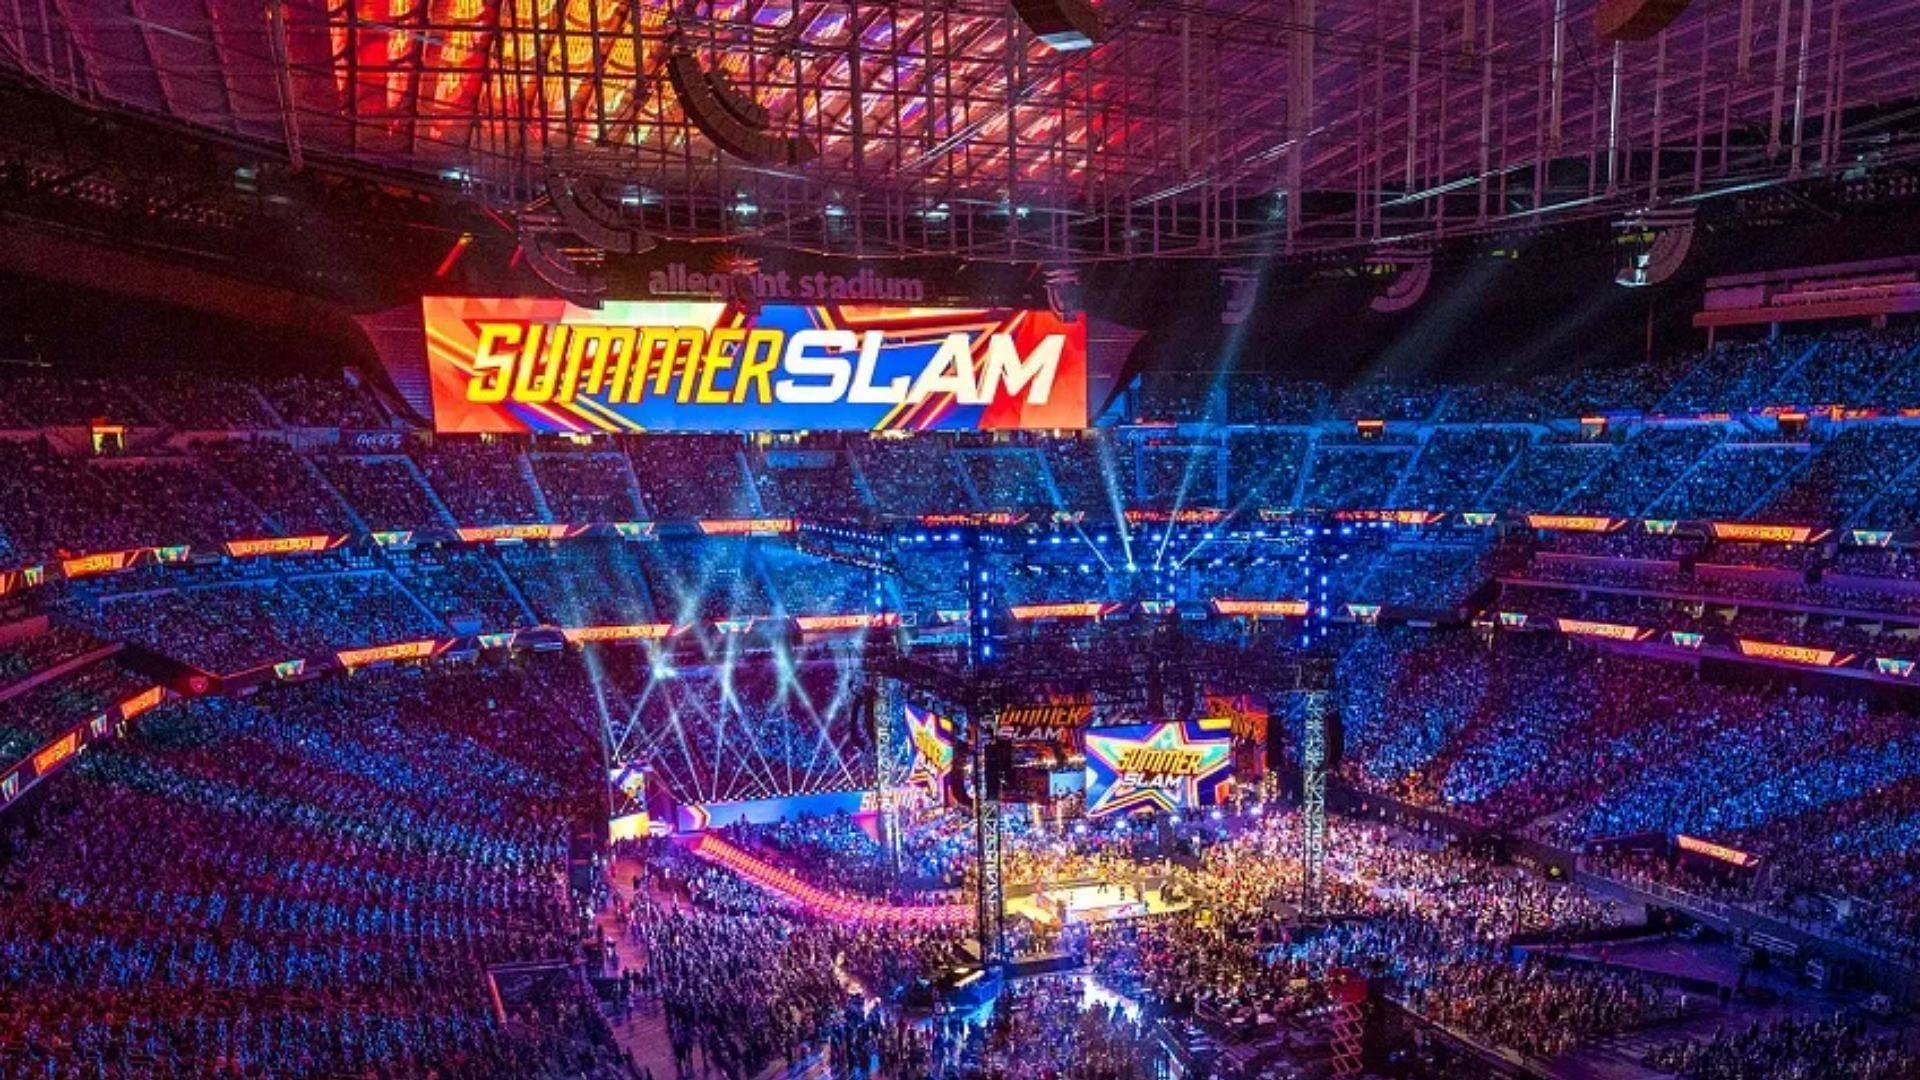 WWE SummerSlam was an enormous event for the company 